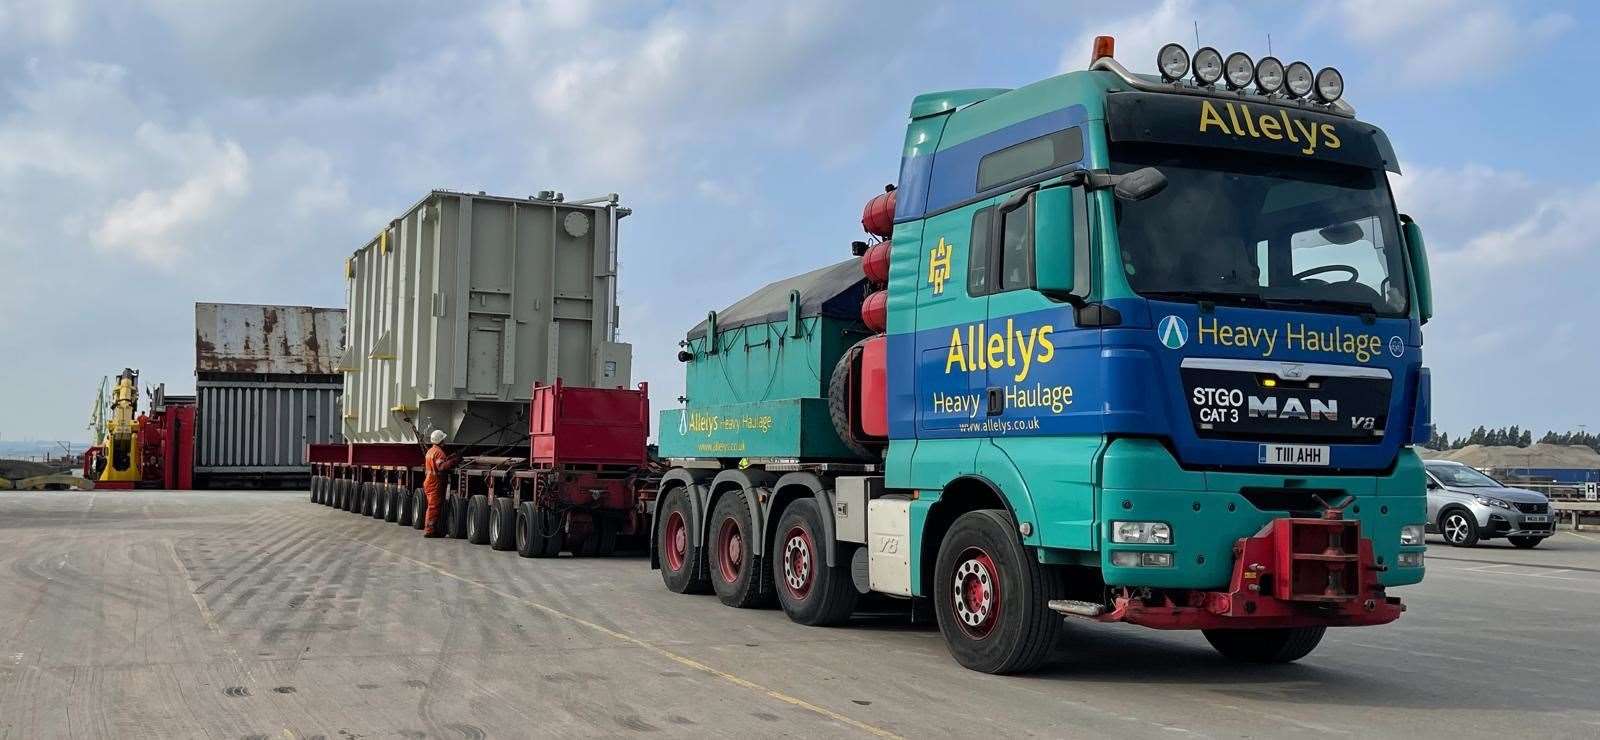 The 280-tonne transformer moved to the Grain power station which led to the main road to the village to be closed while it was safely moved to the new site. Picture: Allelys